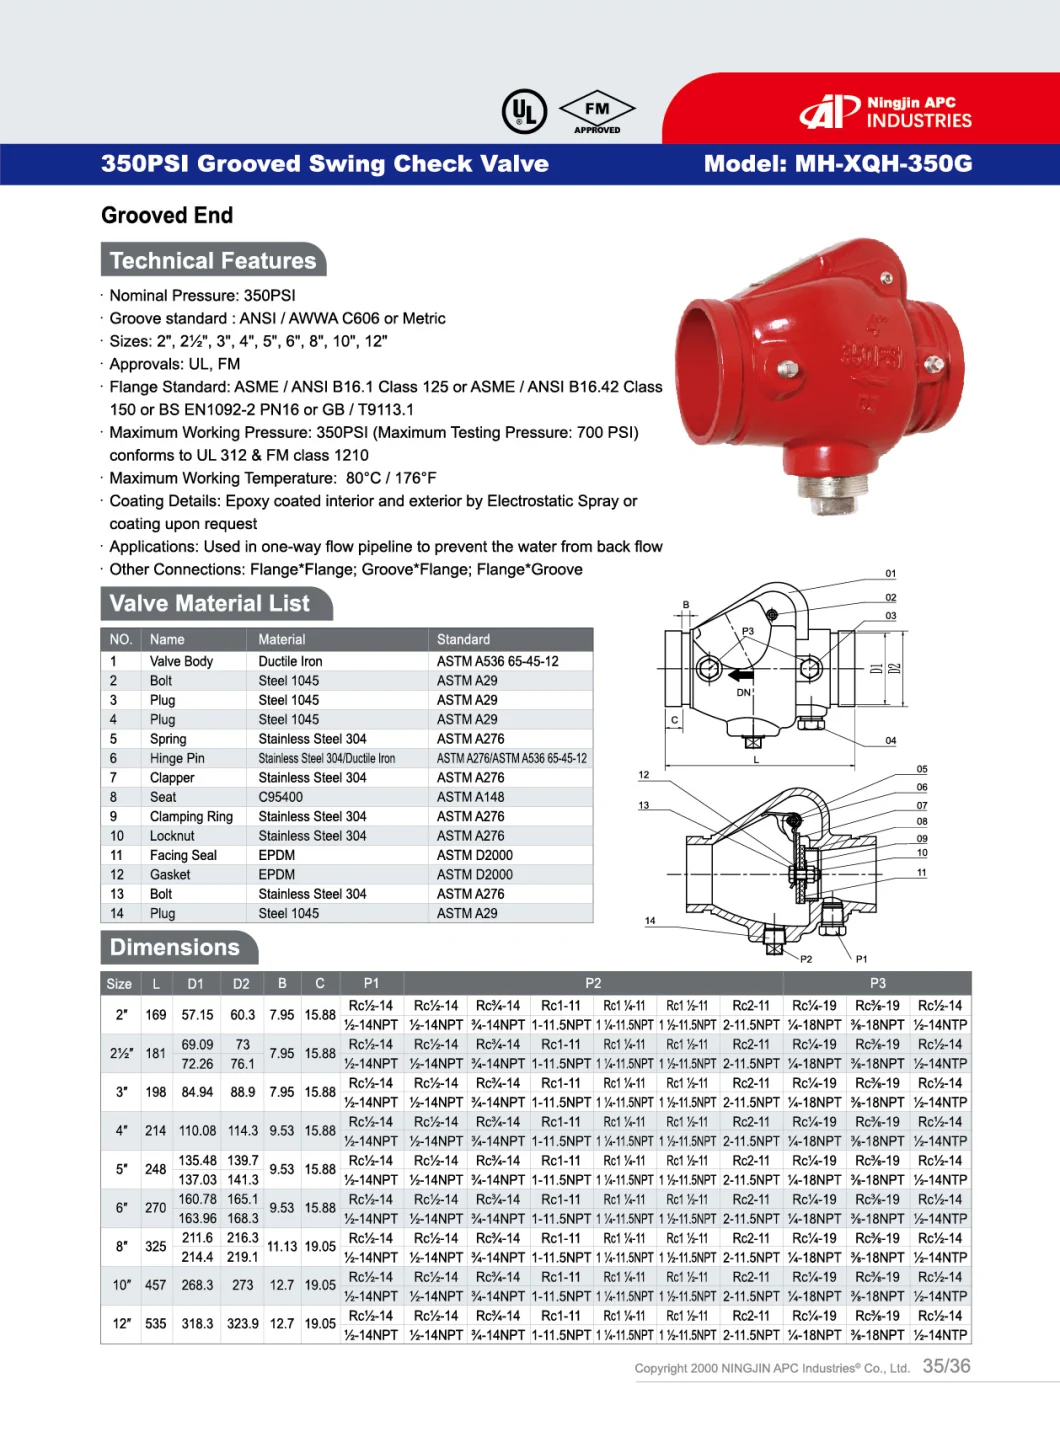 Fire Fighting Valve Grooved Type Check Valve 350psi for Fire Protection Euipment